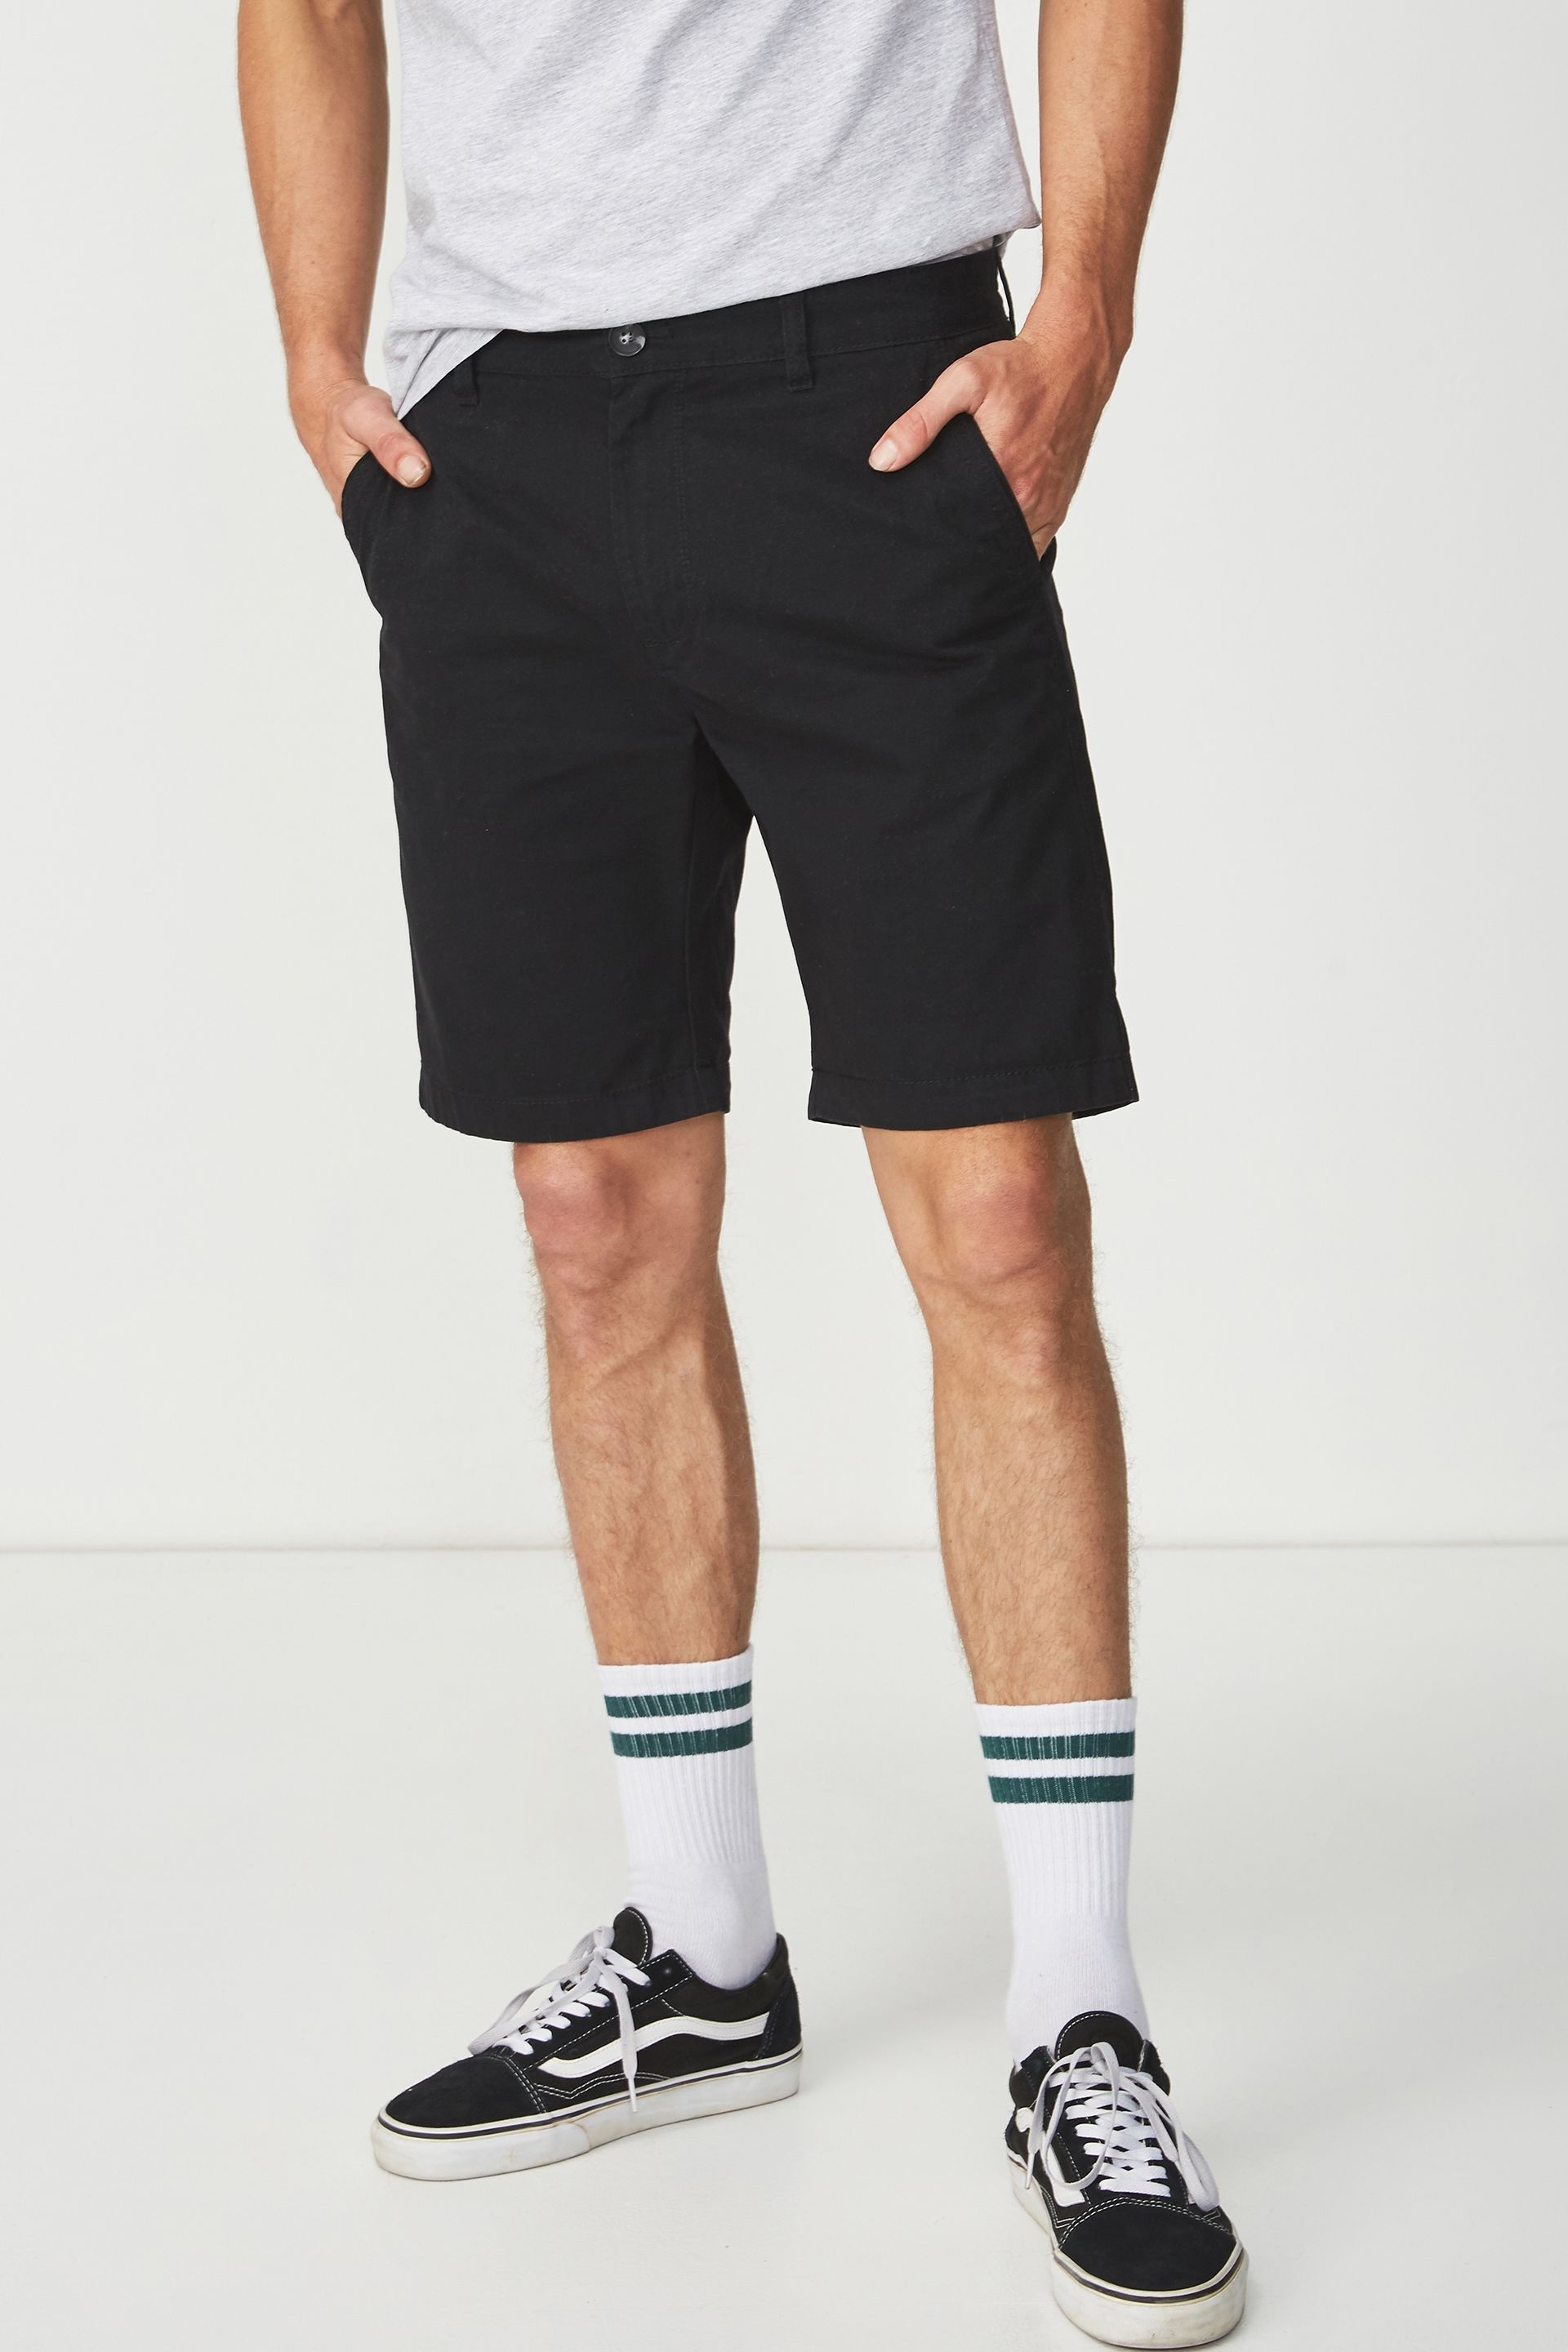 Men's Chino Shorts - Slim Fit & More | Cotton On